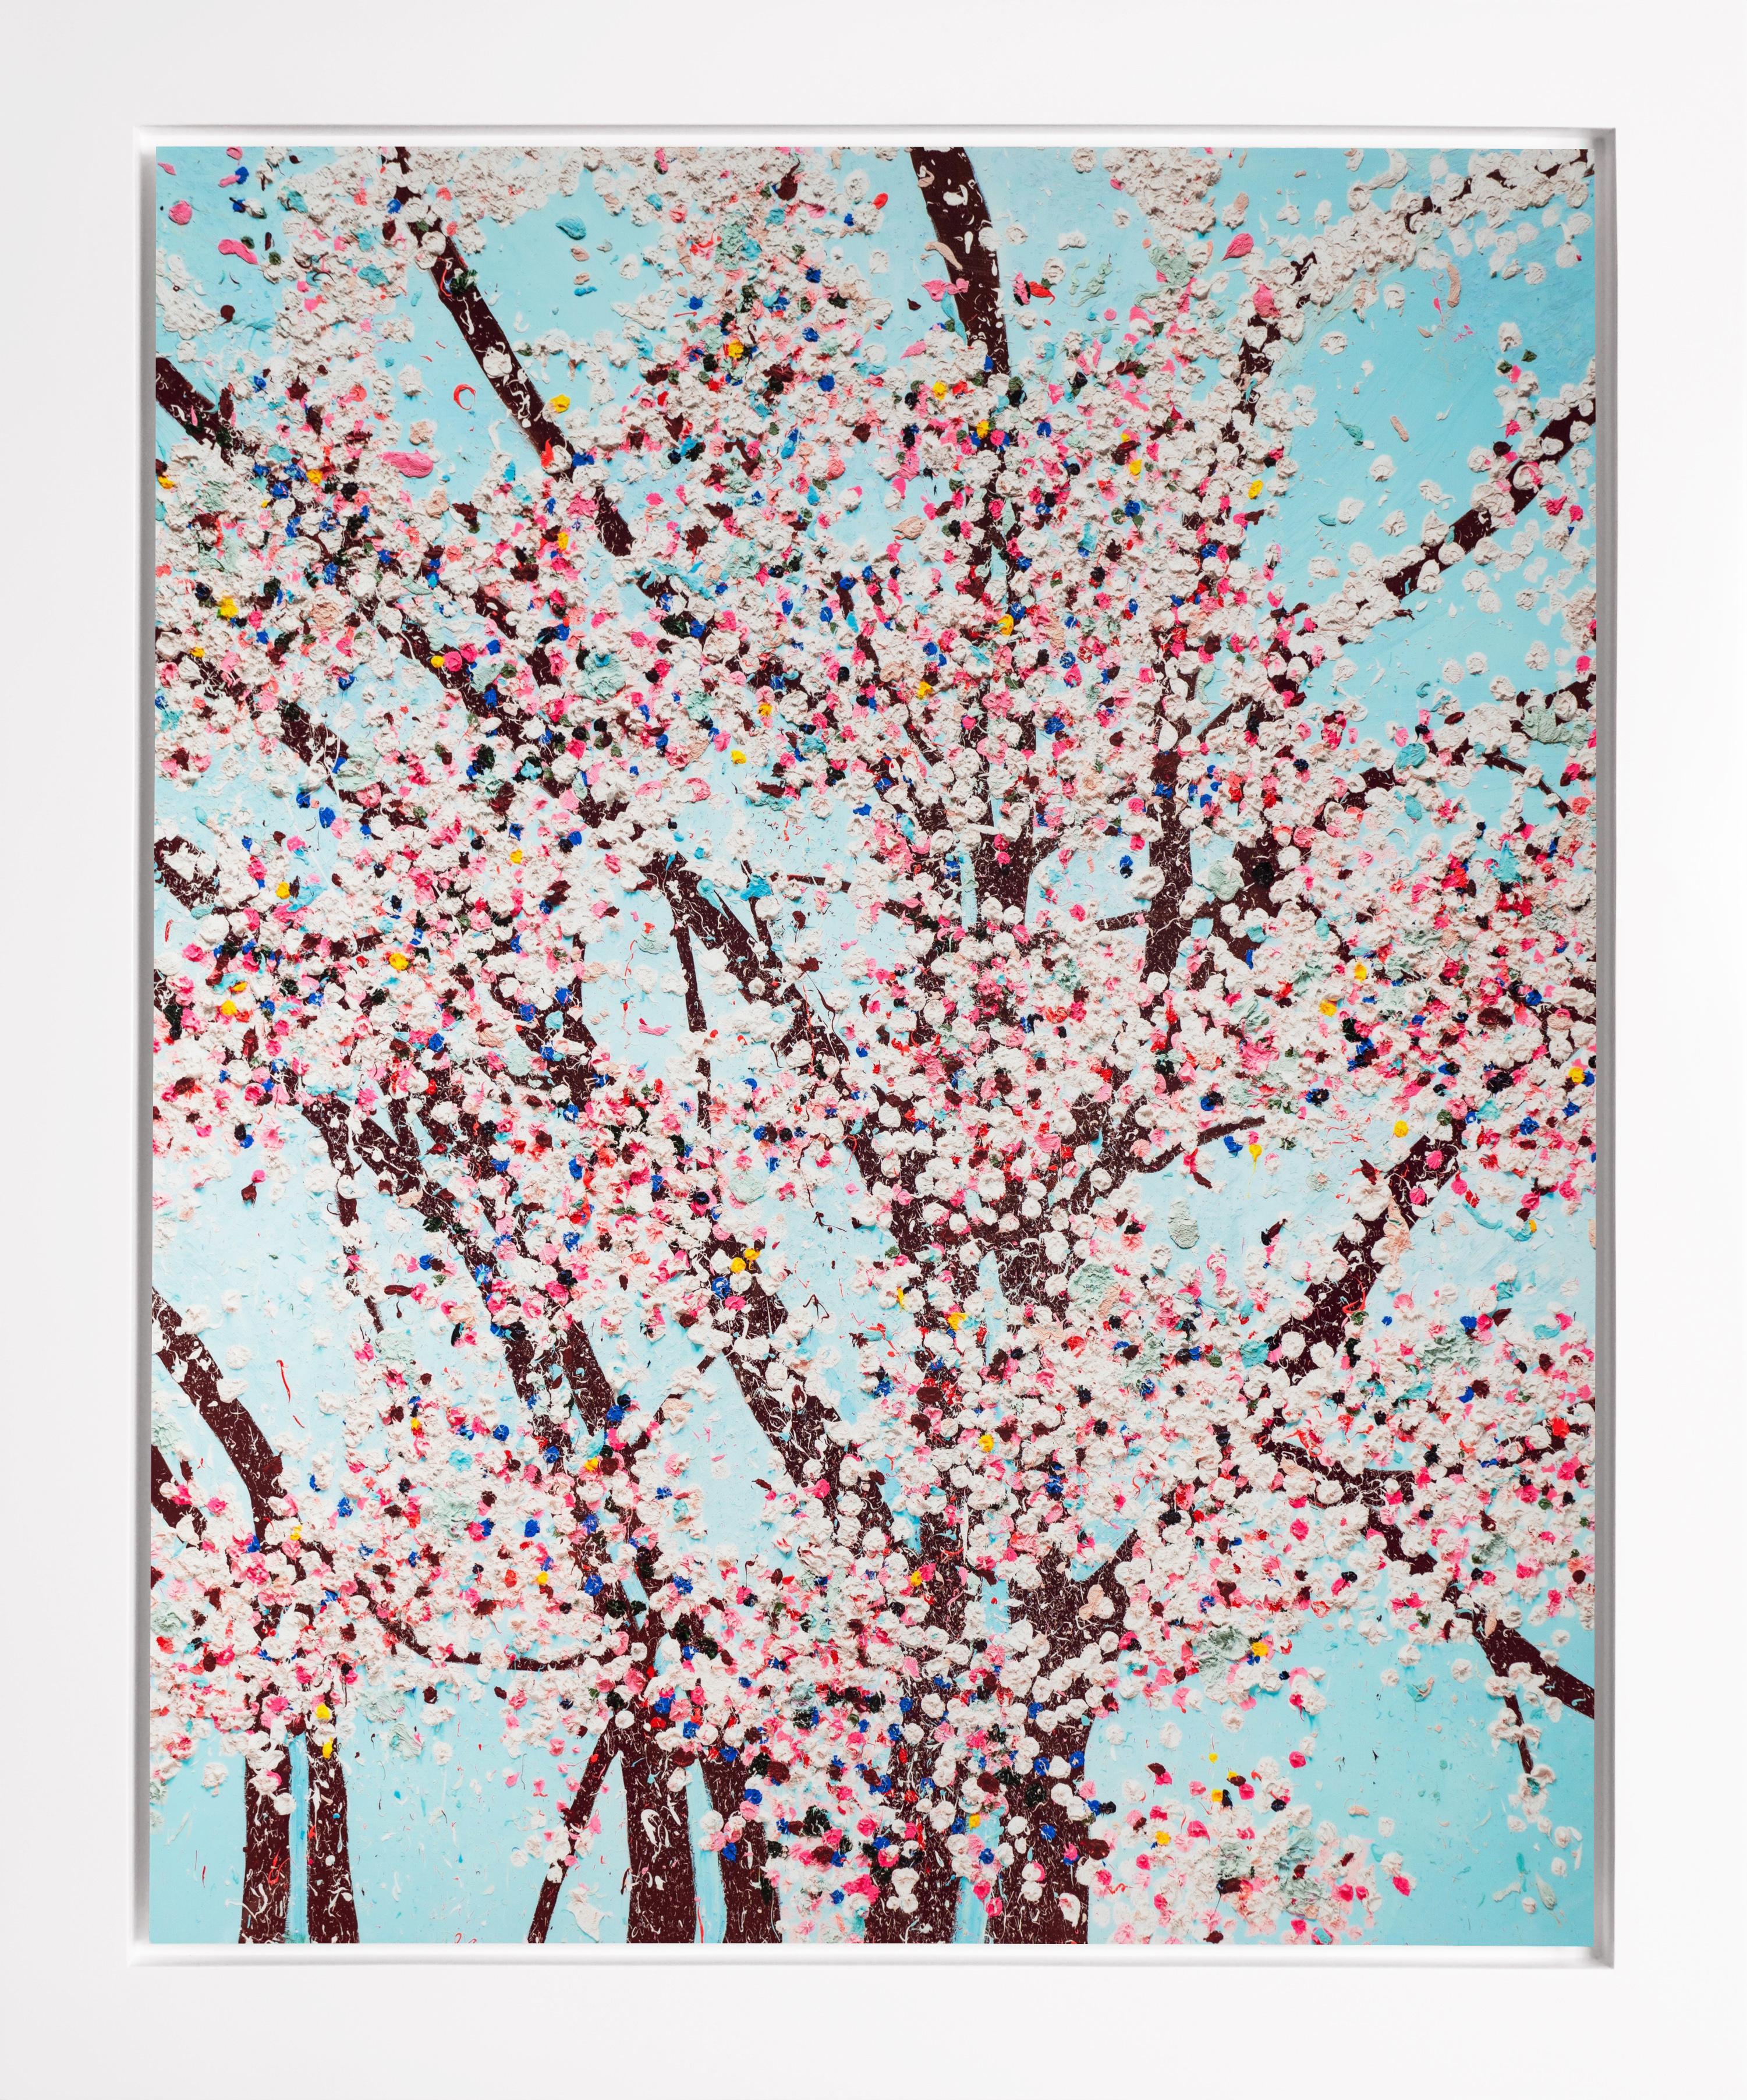 Damien Hirst Landscape Print - The Virtues 'Mercy', Limited Edition 'Cherry Blossom' Landscape, 2021